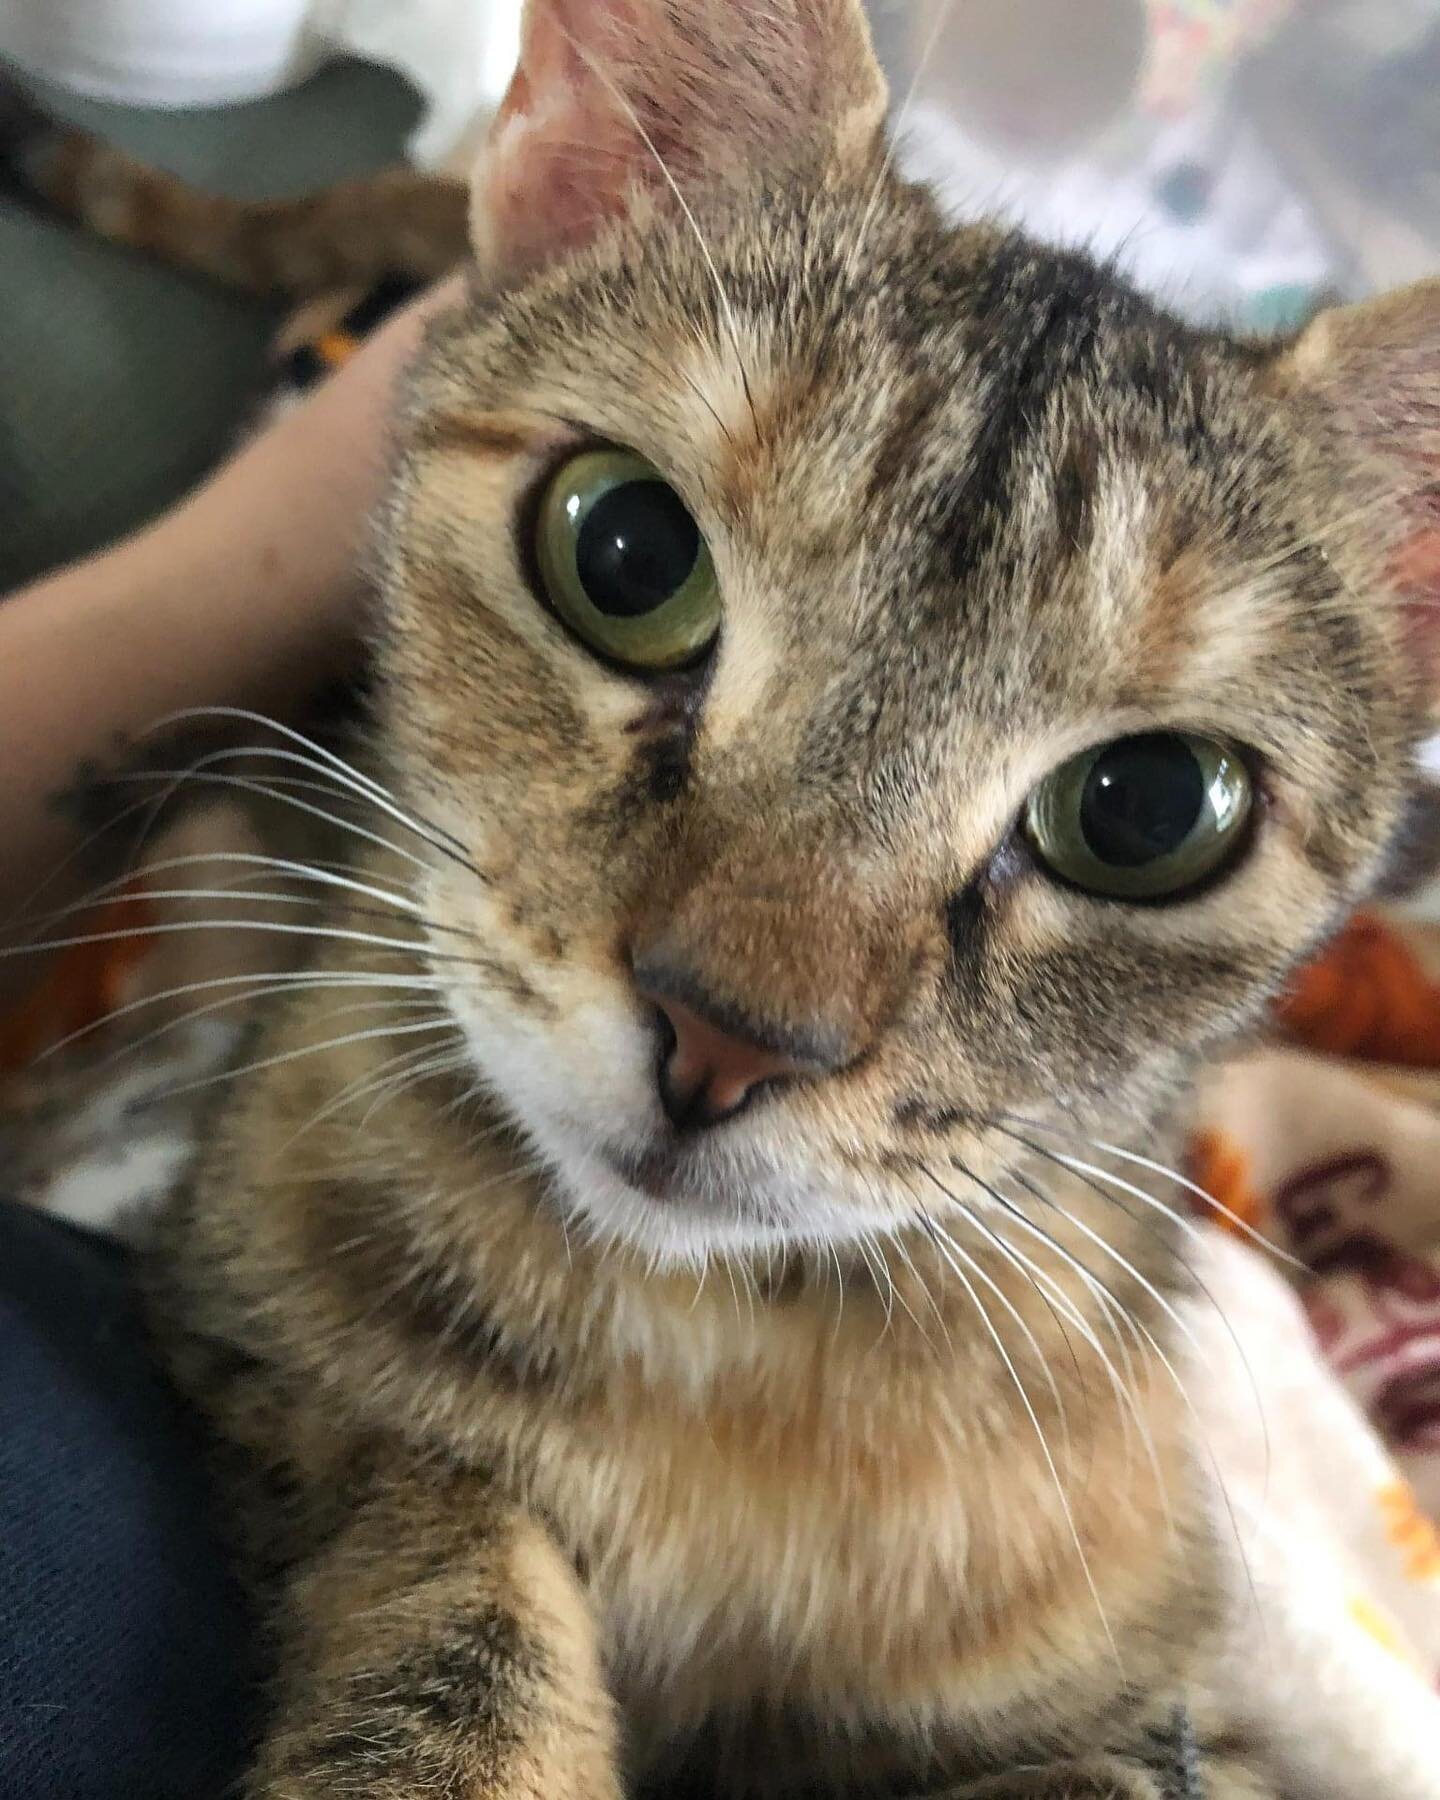 Meet Melody the most affectionate and best cat around!!😍

This is what her amazing foster mom says about her:

&quot;This sweet tabbico girl is the very best mama ever! ❤️ She's the sweetest, smartest girl who is the definition of a bombproof cat. S